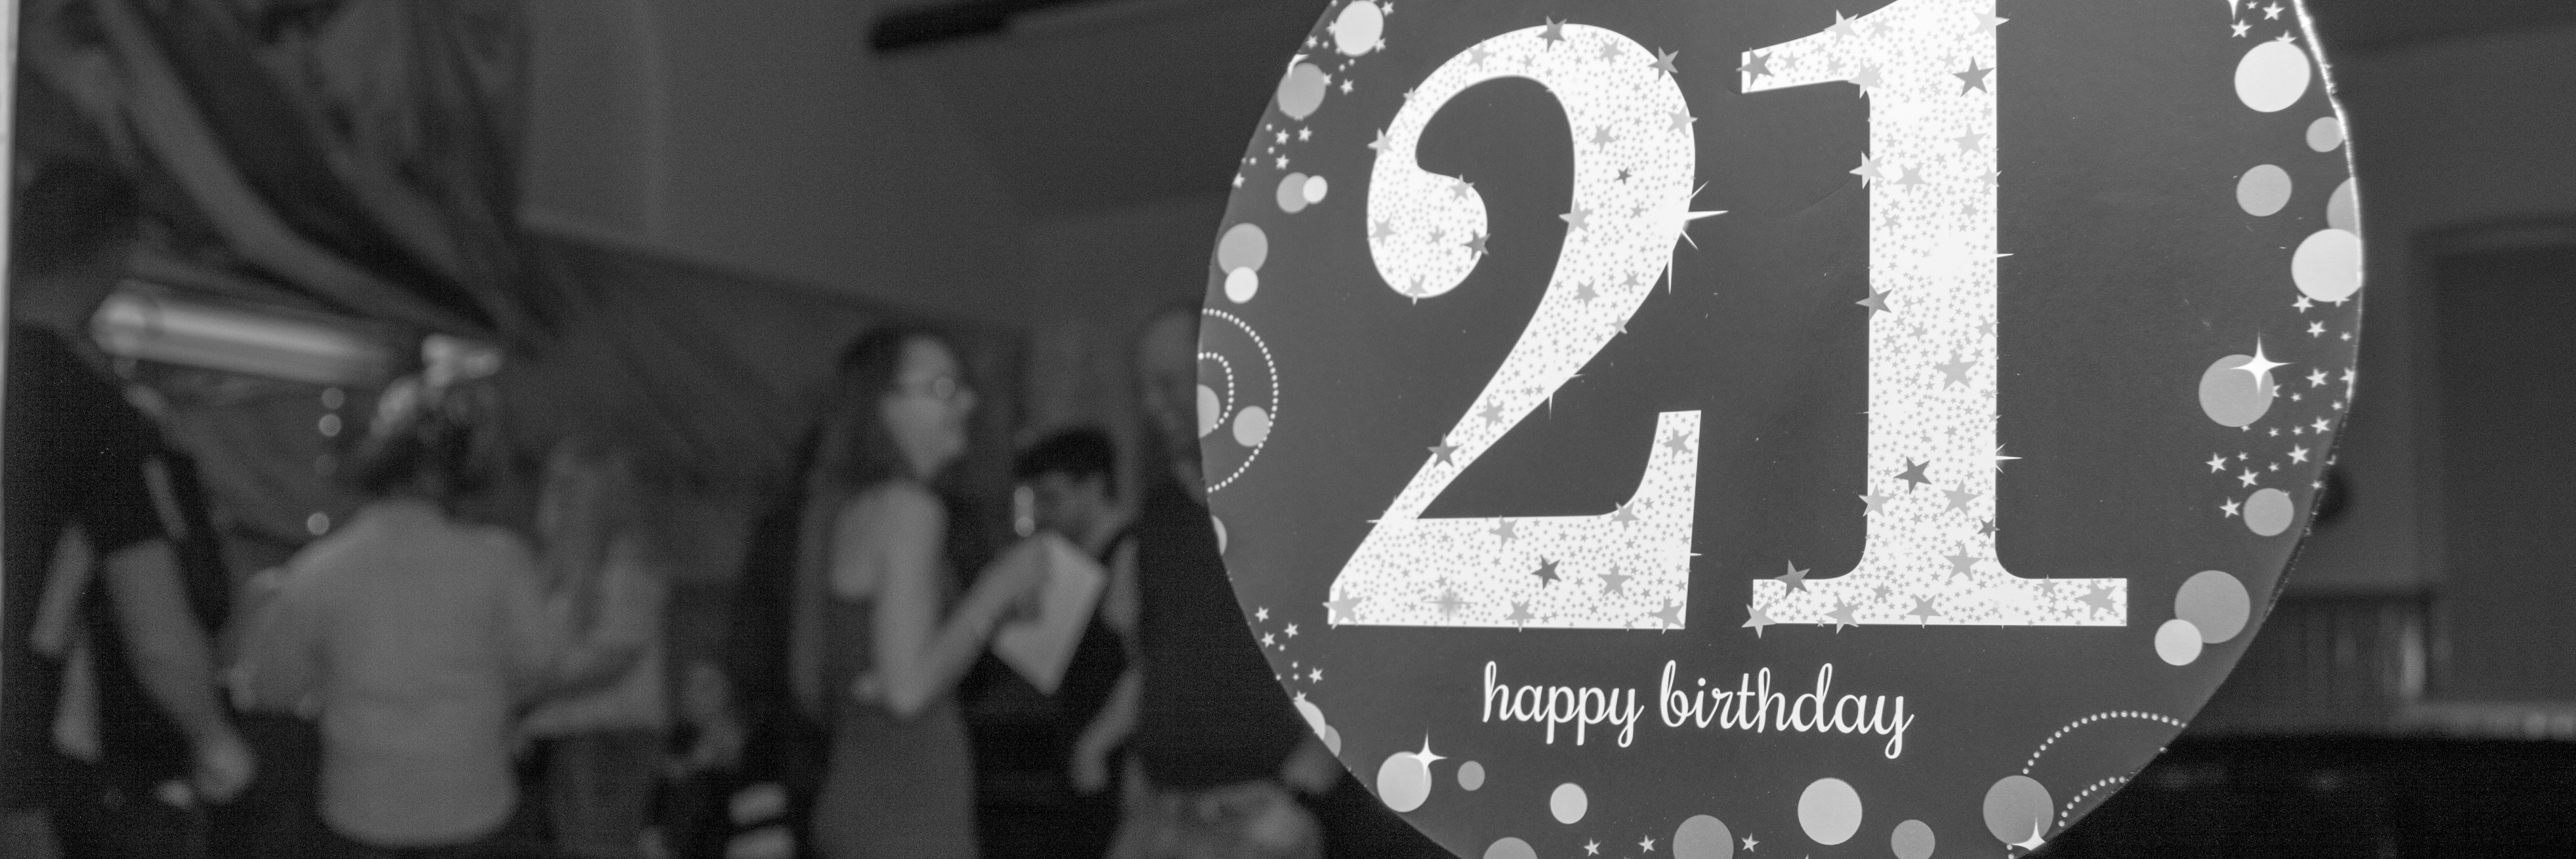 sign on window for 21st birthday party